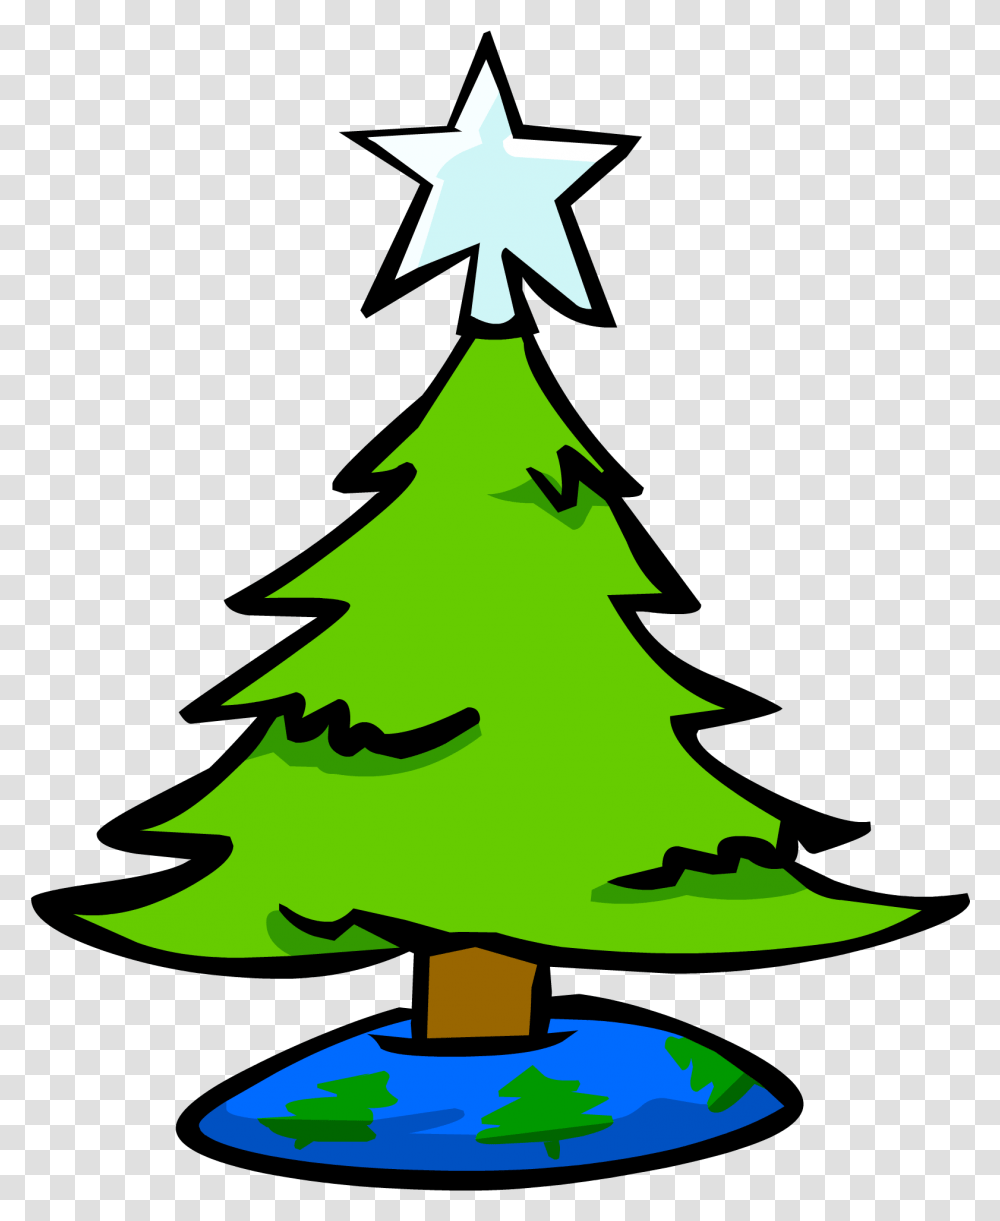 Club Penguin Rewritten Wiki Christmas Tree Image Small, Plant, Symbol, Star Symbol, Person Transparent Png